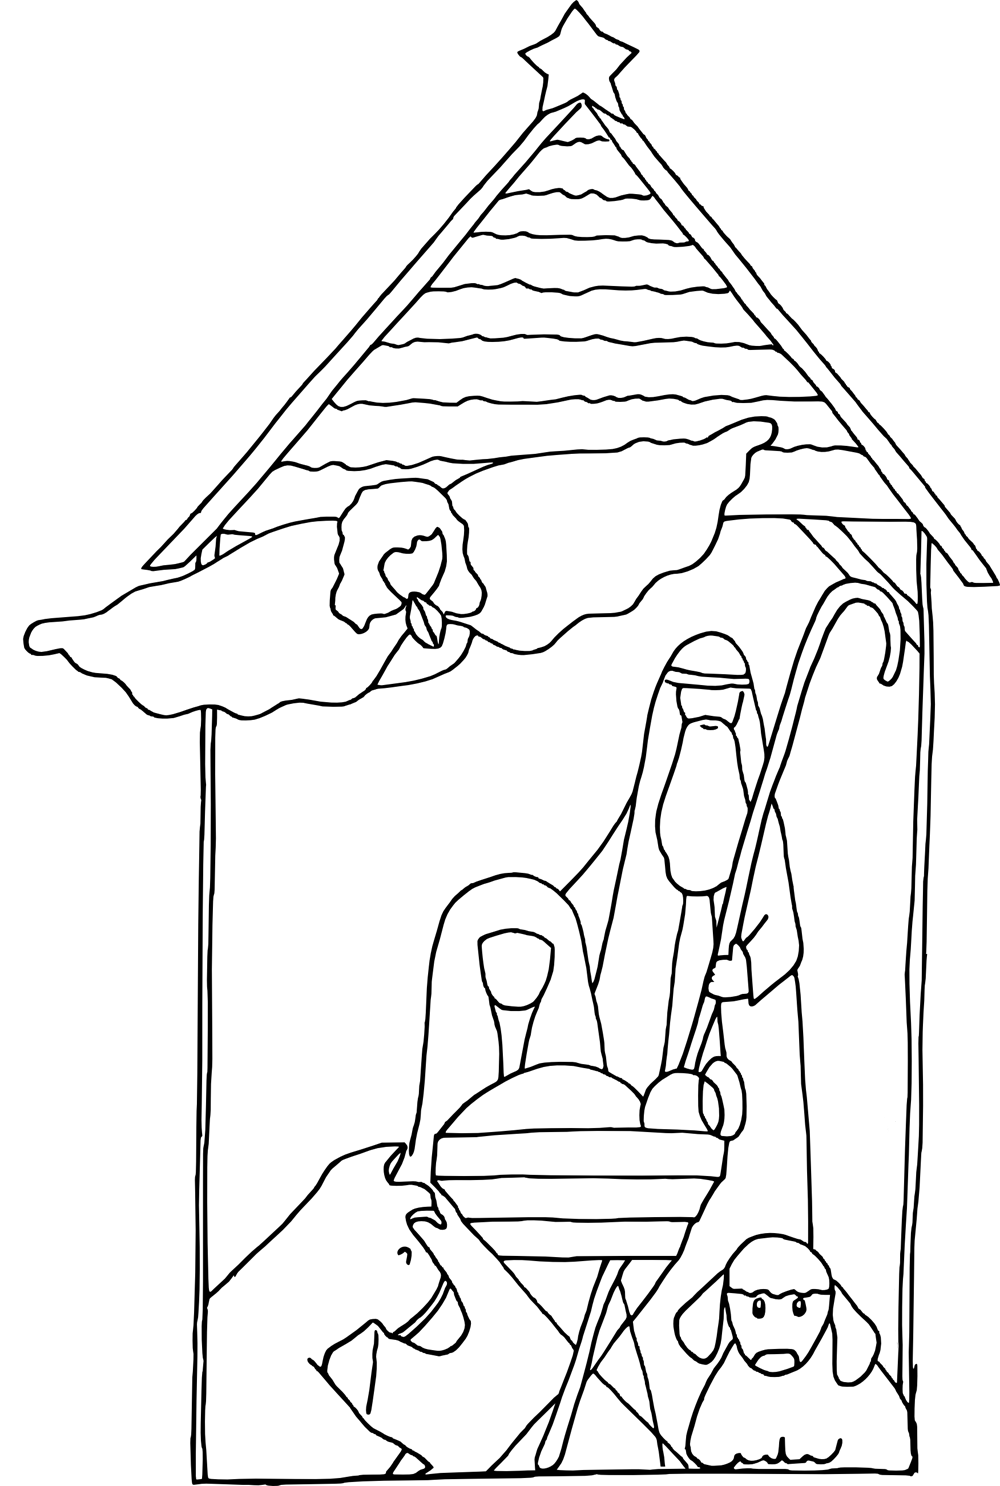 Simple Baby Jesuss Coloring Page